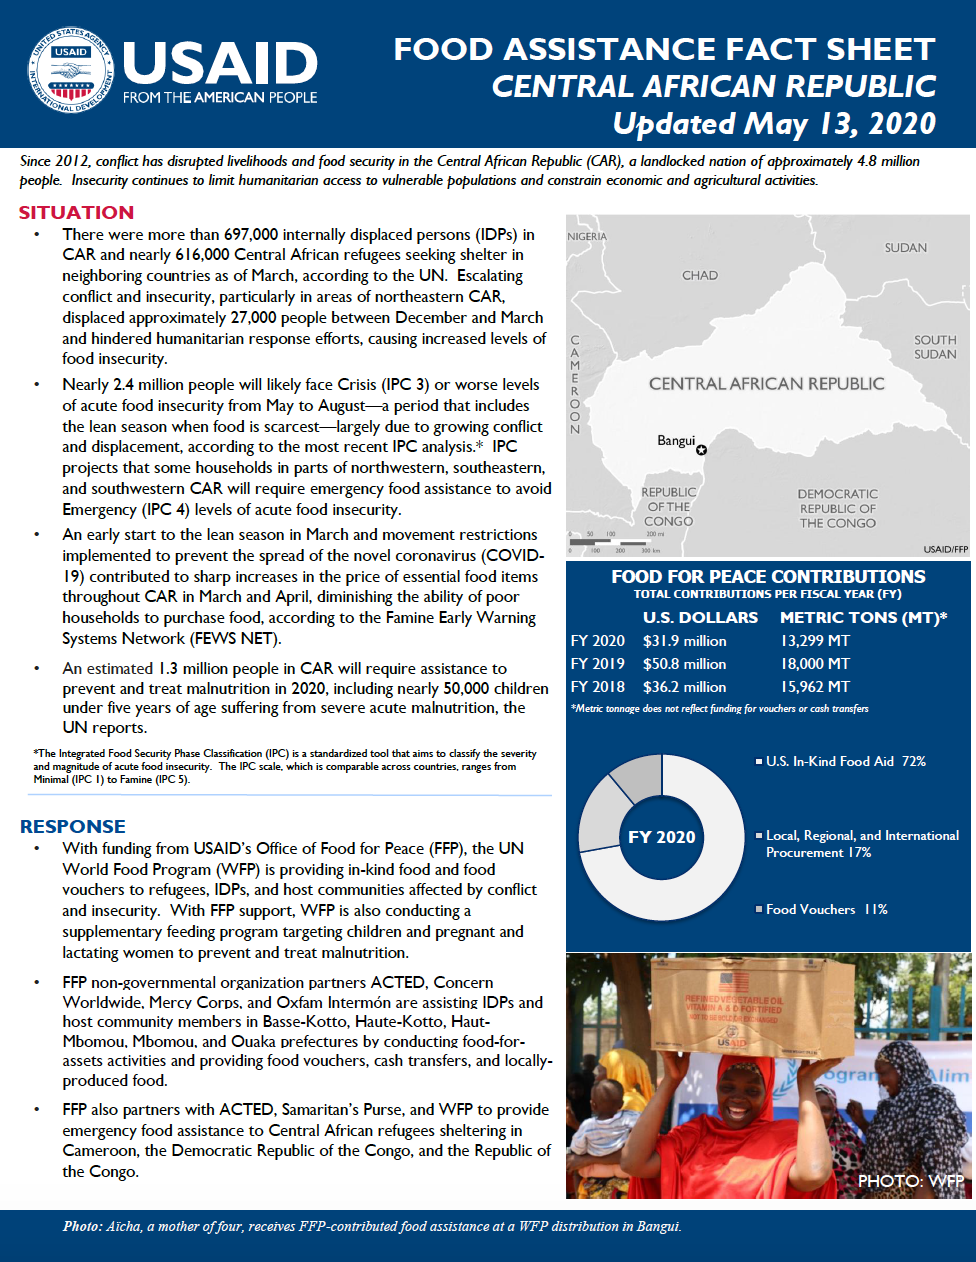 Food Assistance Fact Sheet - Central African Republic